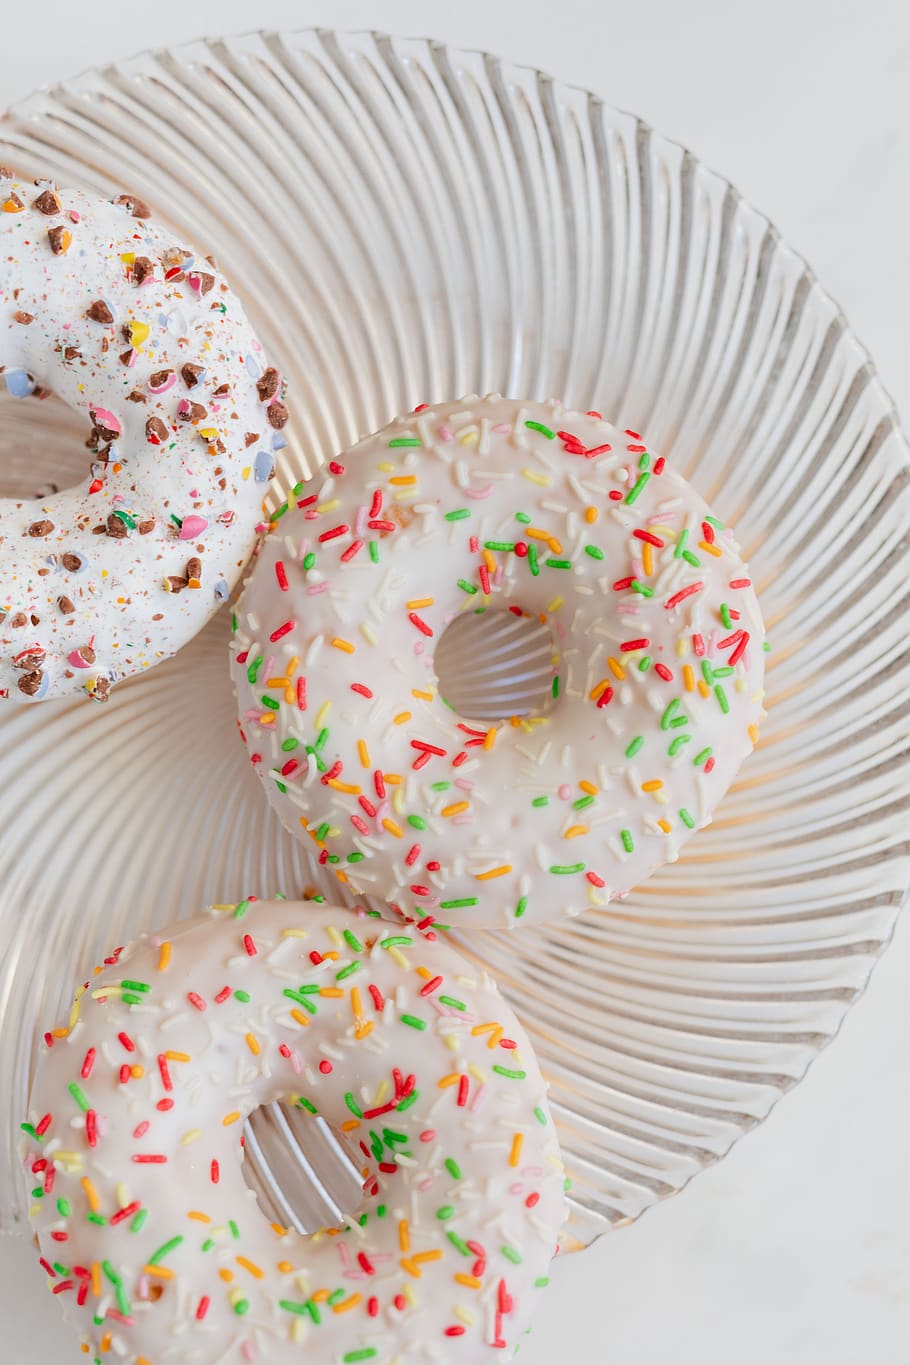 donuts, doughnuts, white, plate, marble, minimal, sweet, Coloured, dunts, glass